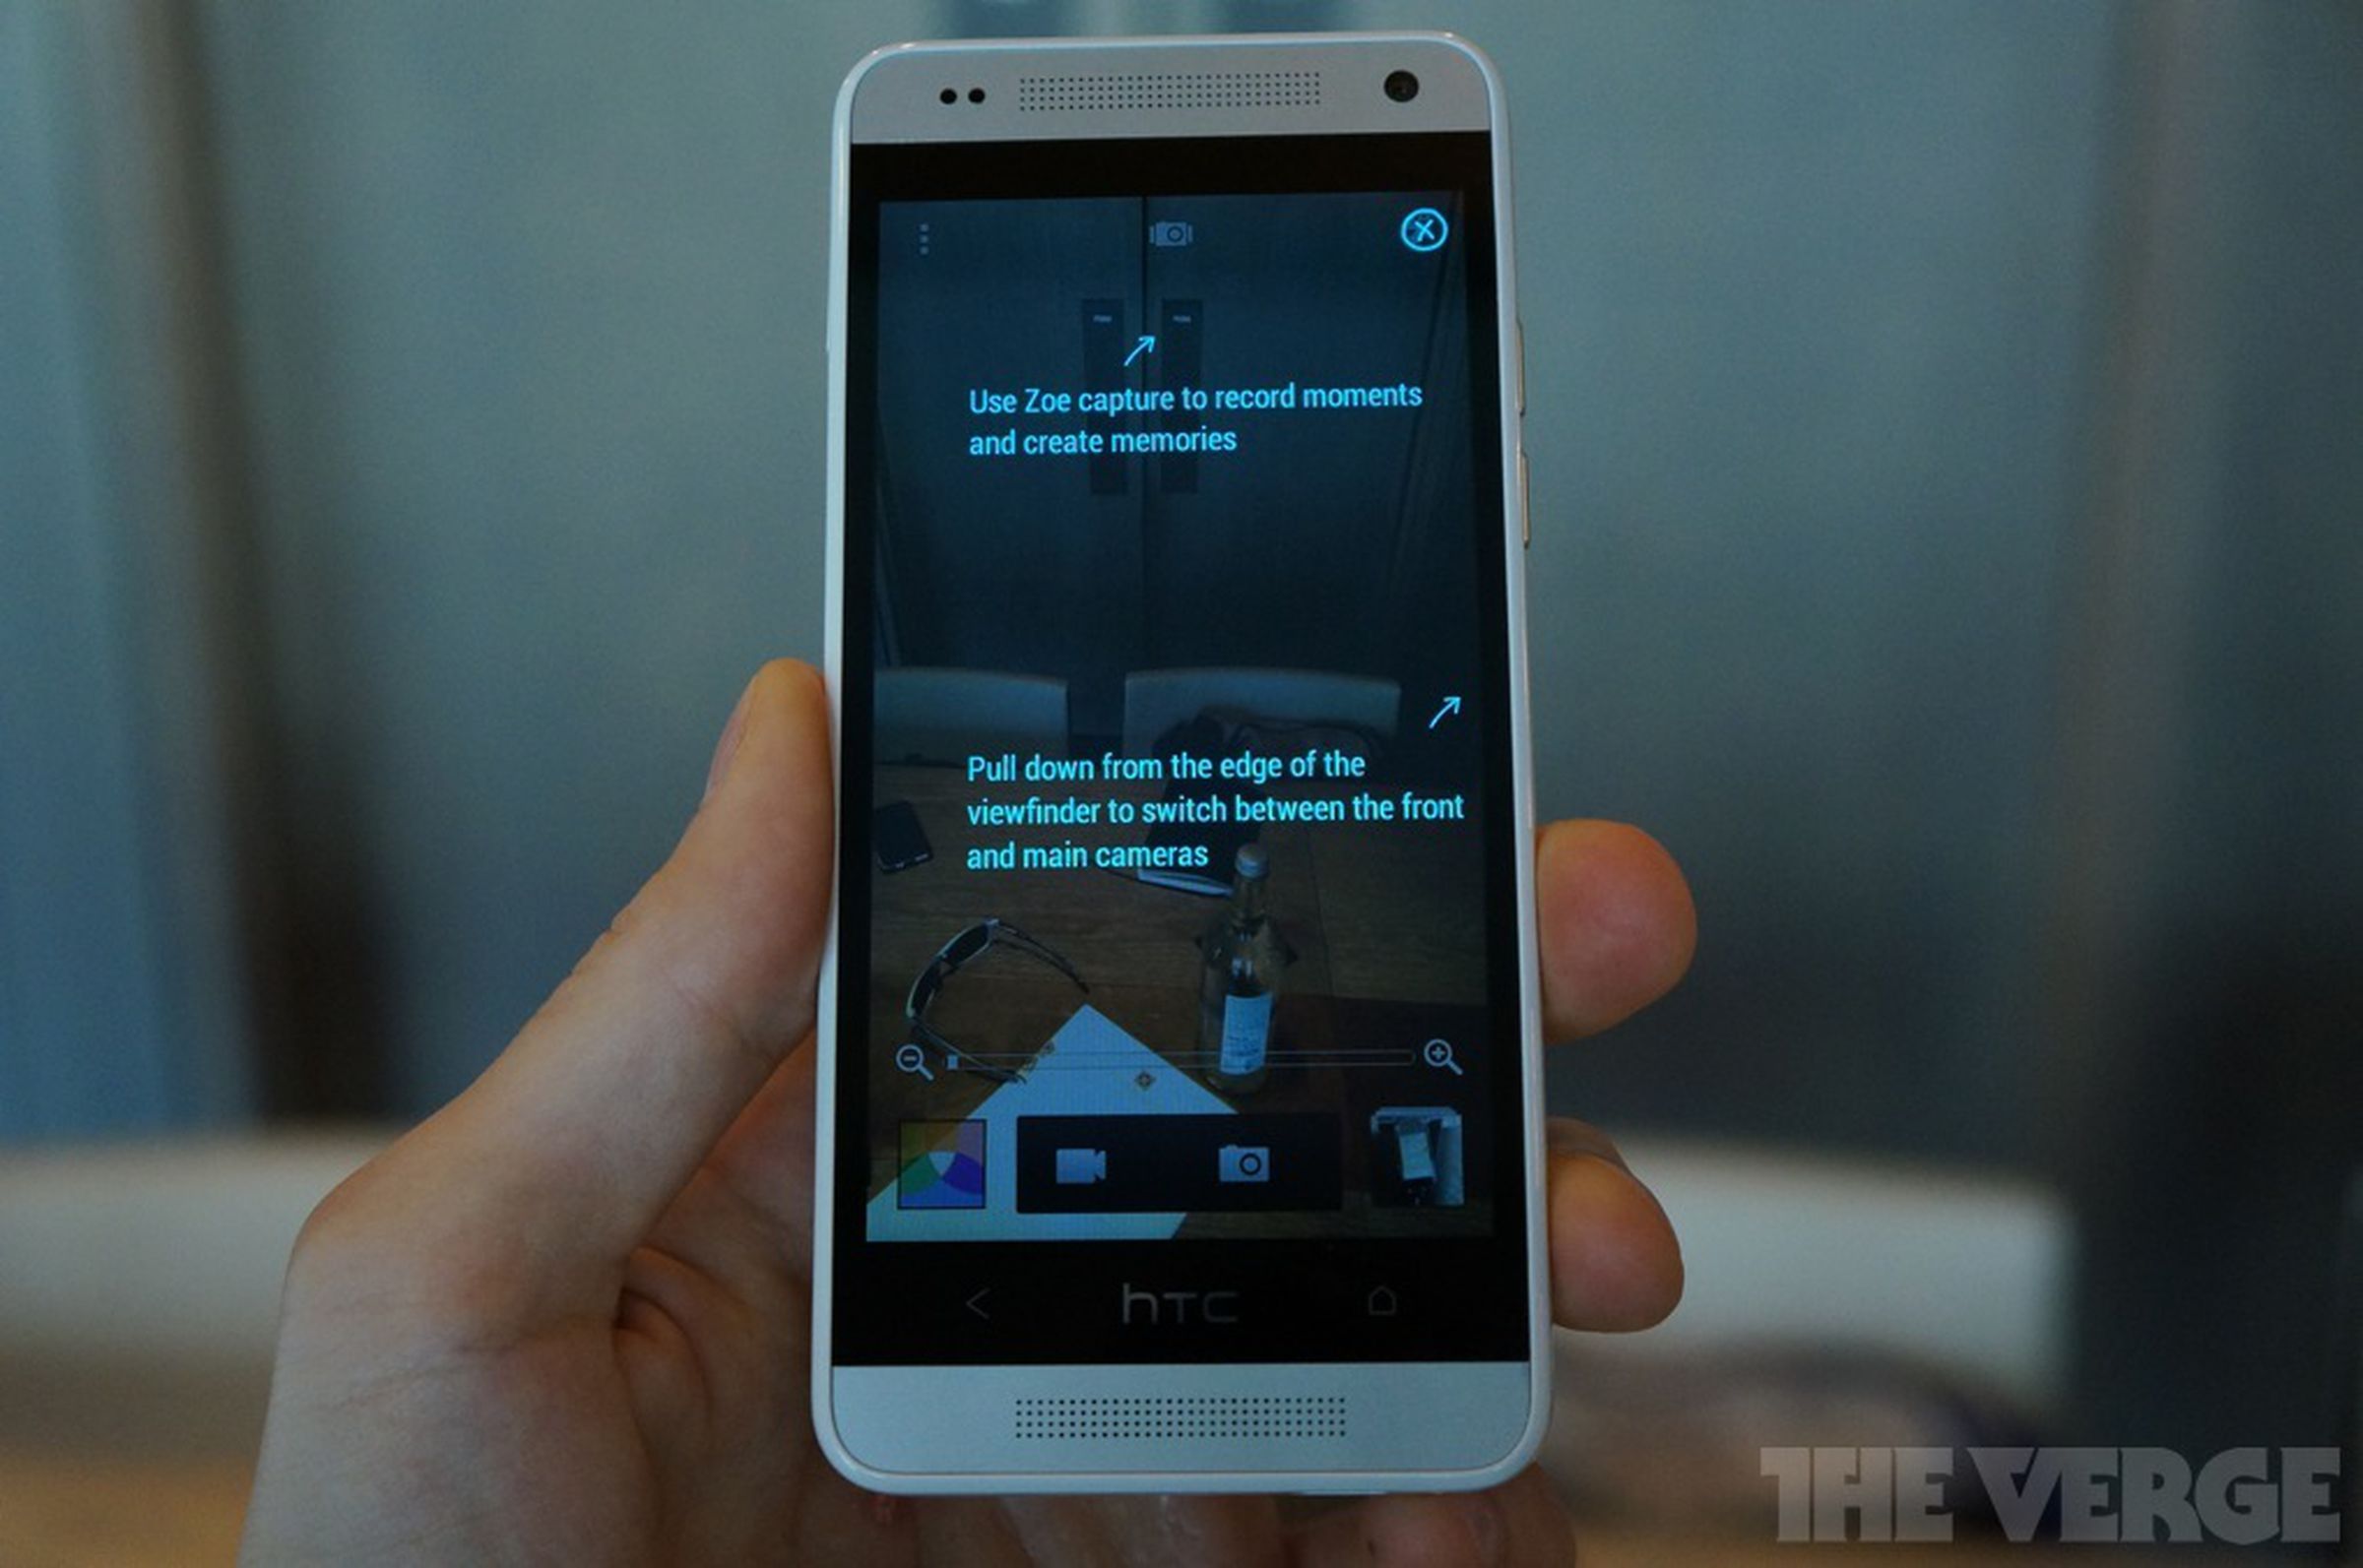 HTC One mini hands-on photos